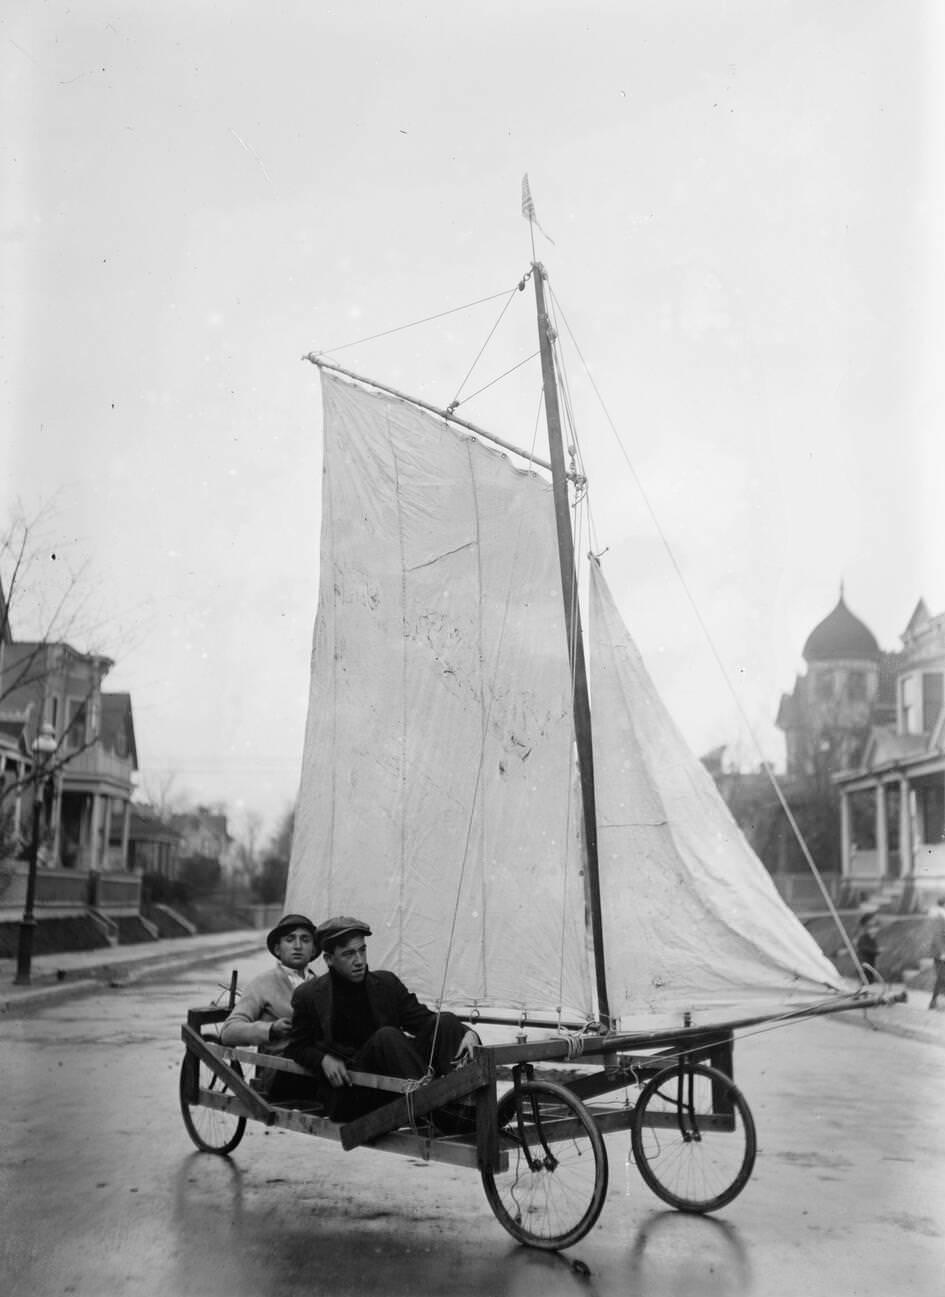 Young Adults Riding Sail Wagons In Victorian Flatbush, Brooklyn, 1912.